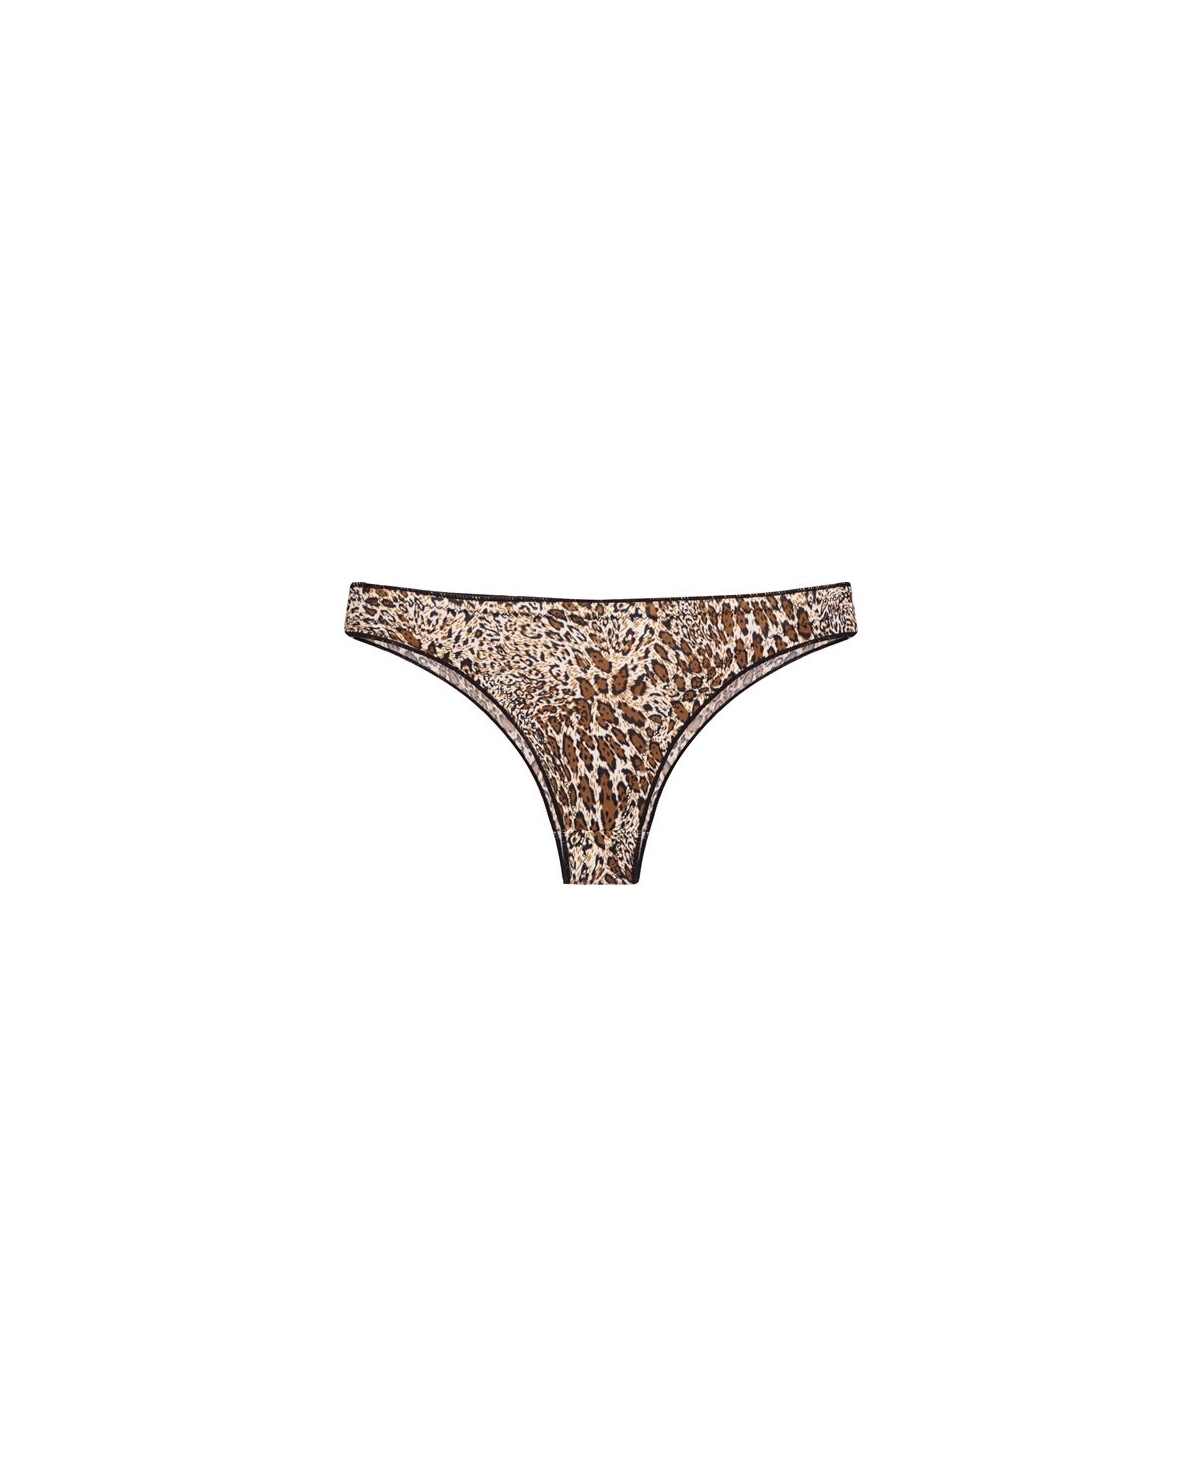 Brief in animal print